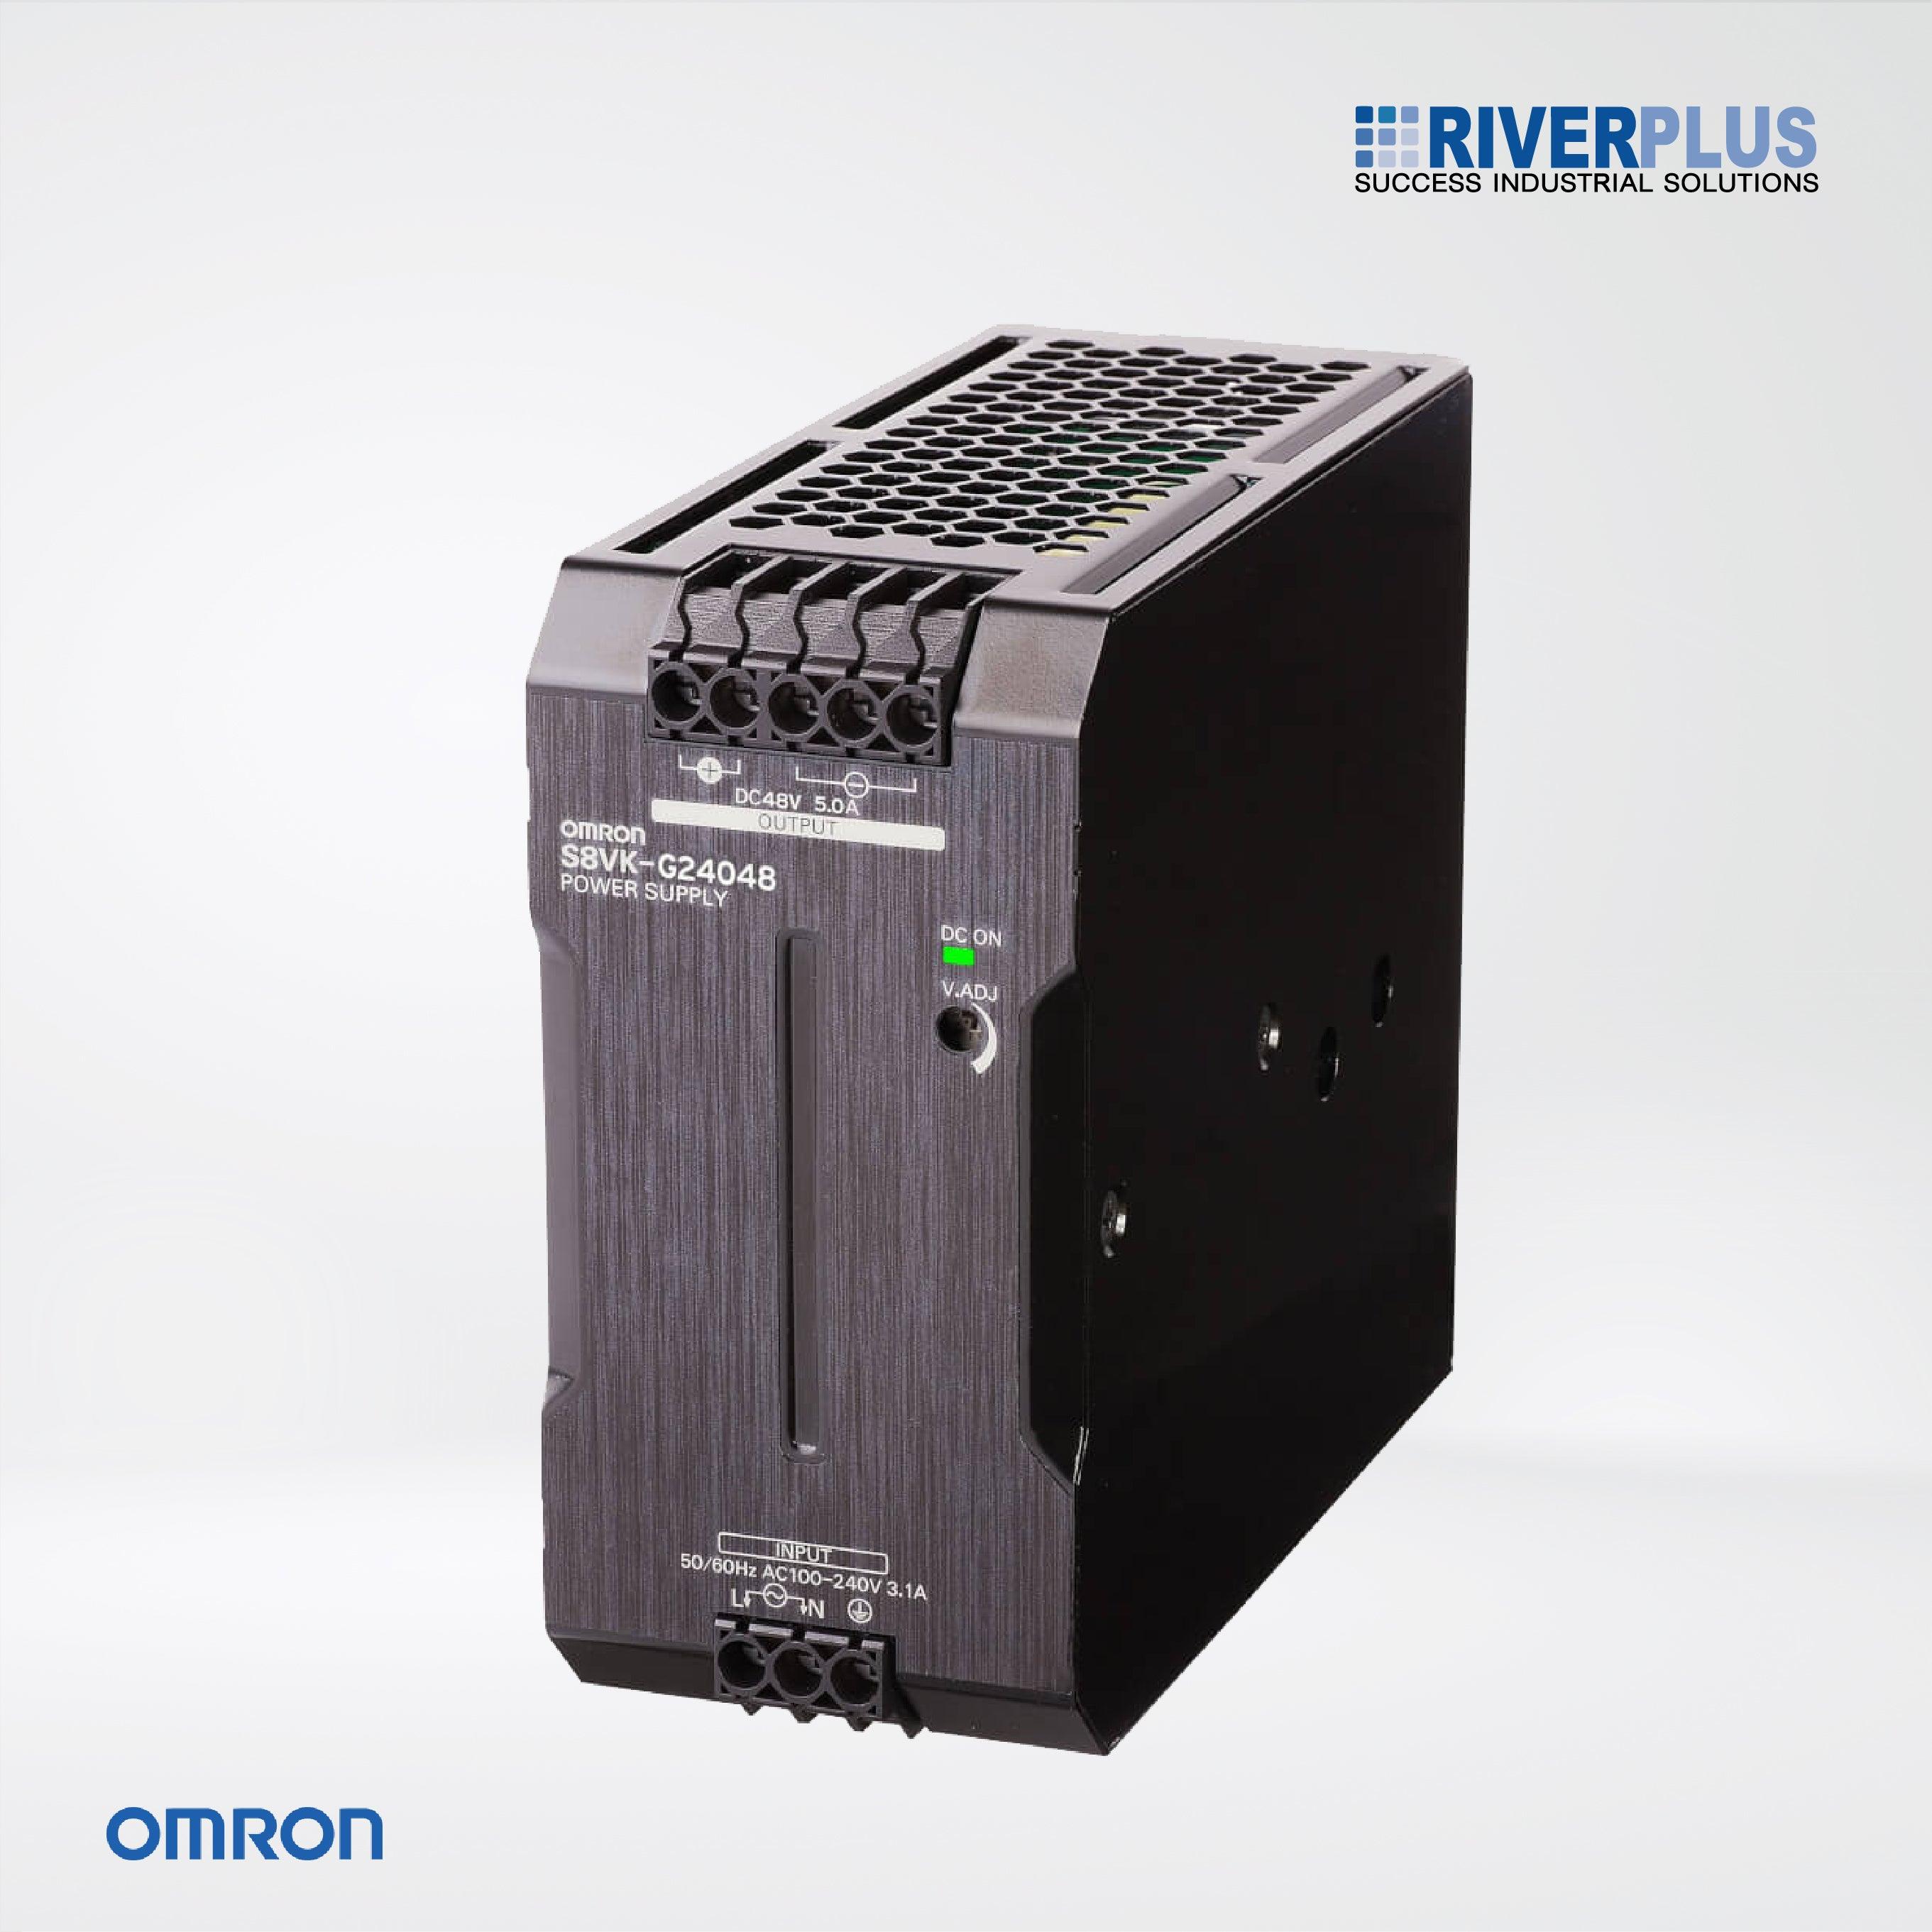 S8VK-G24024 Switch Mode Power Supply , 240W , 24VDC , standard with single-phase input - Riverplus